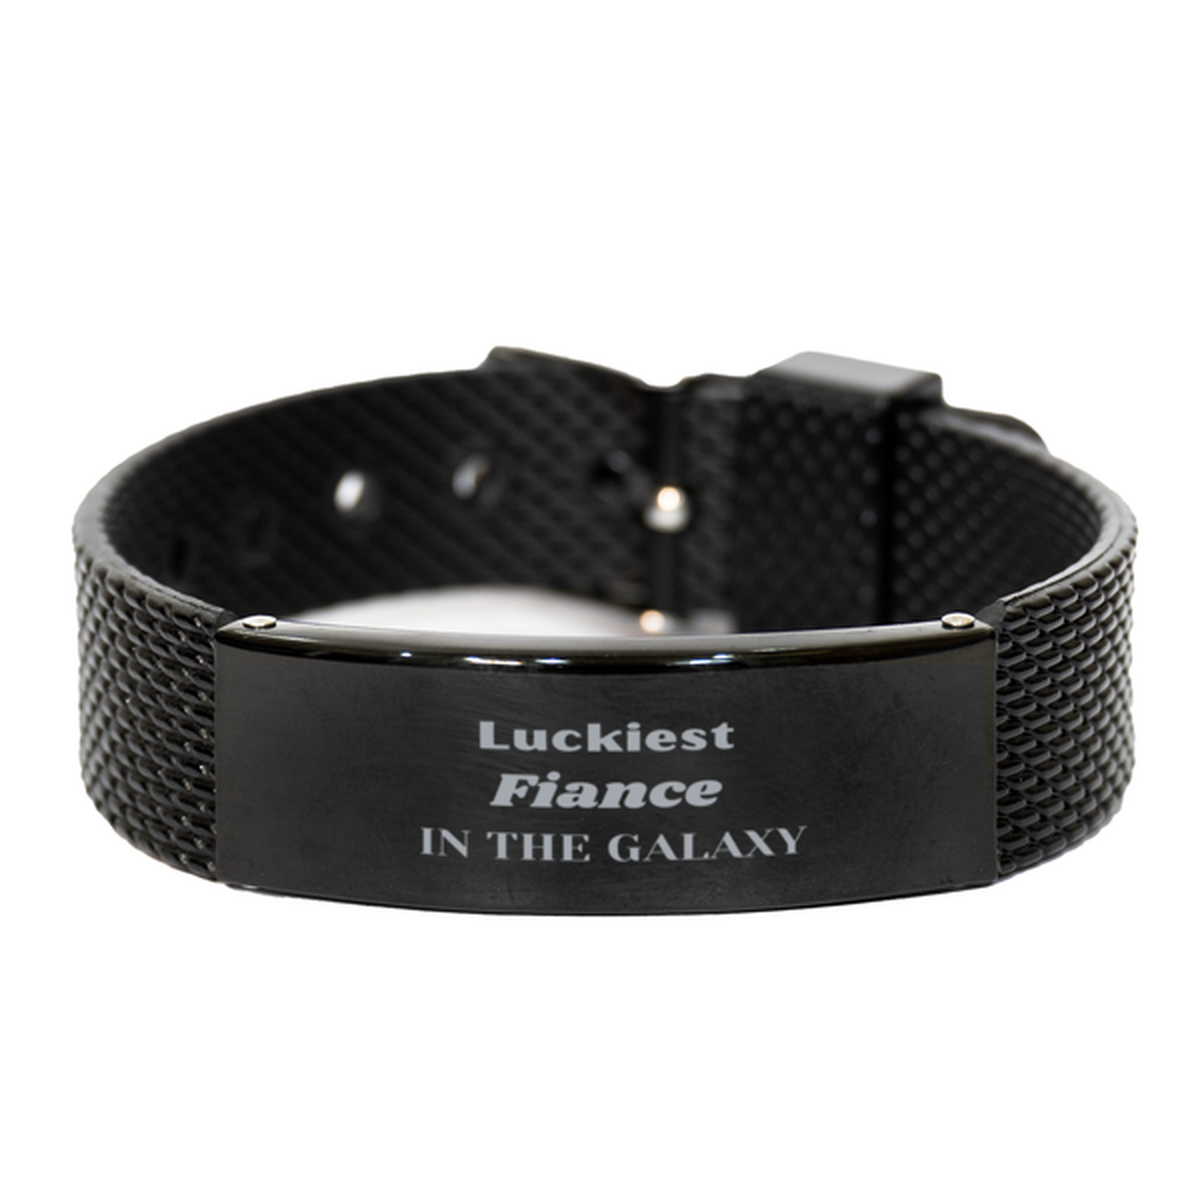 Luckiest Fiance in the Galaxy, To My Fiance Engraved Gifts, Christmas Fiance Black Shark Mesh Bracelet Gifts, X-mas Birthday Unique Gifts For Fiance Men Women